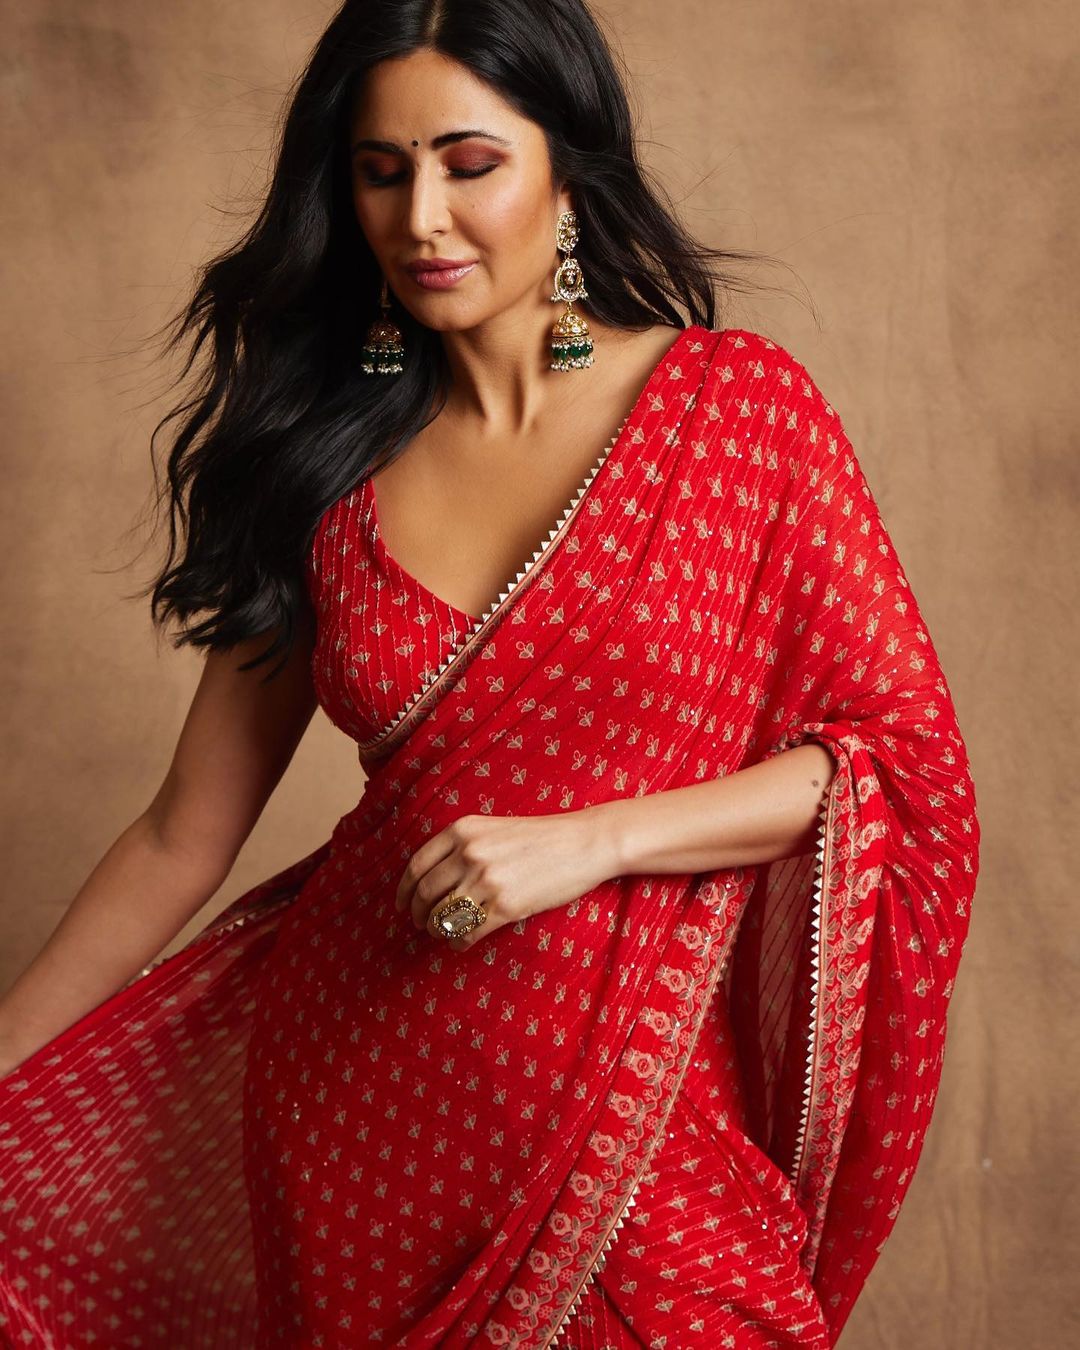 Katrina Kaif's sultry saree game with strappy blouses is a must-see for ethnic fashionistas, and we're completely smitten.